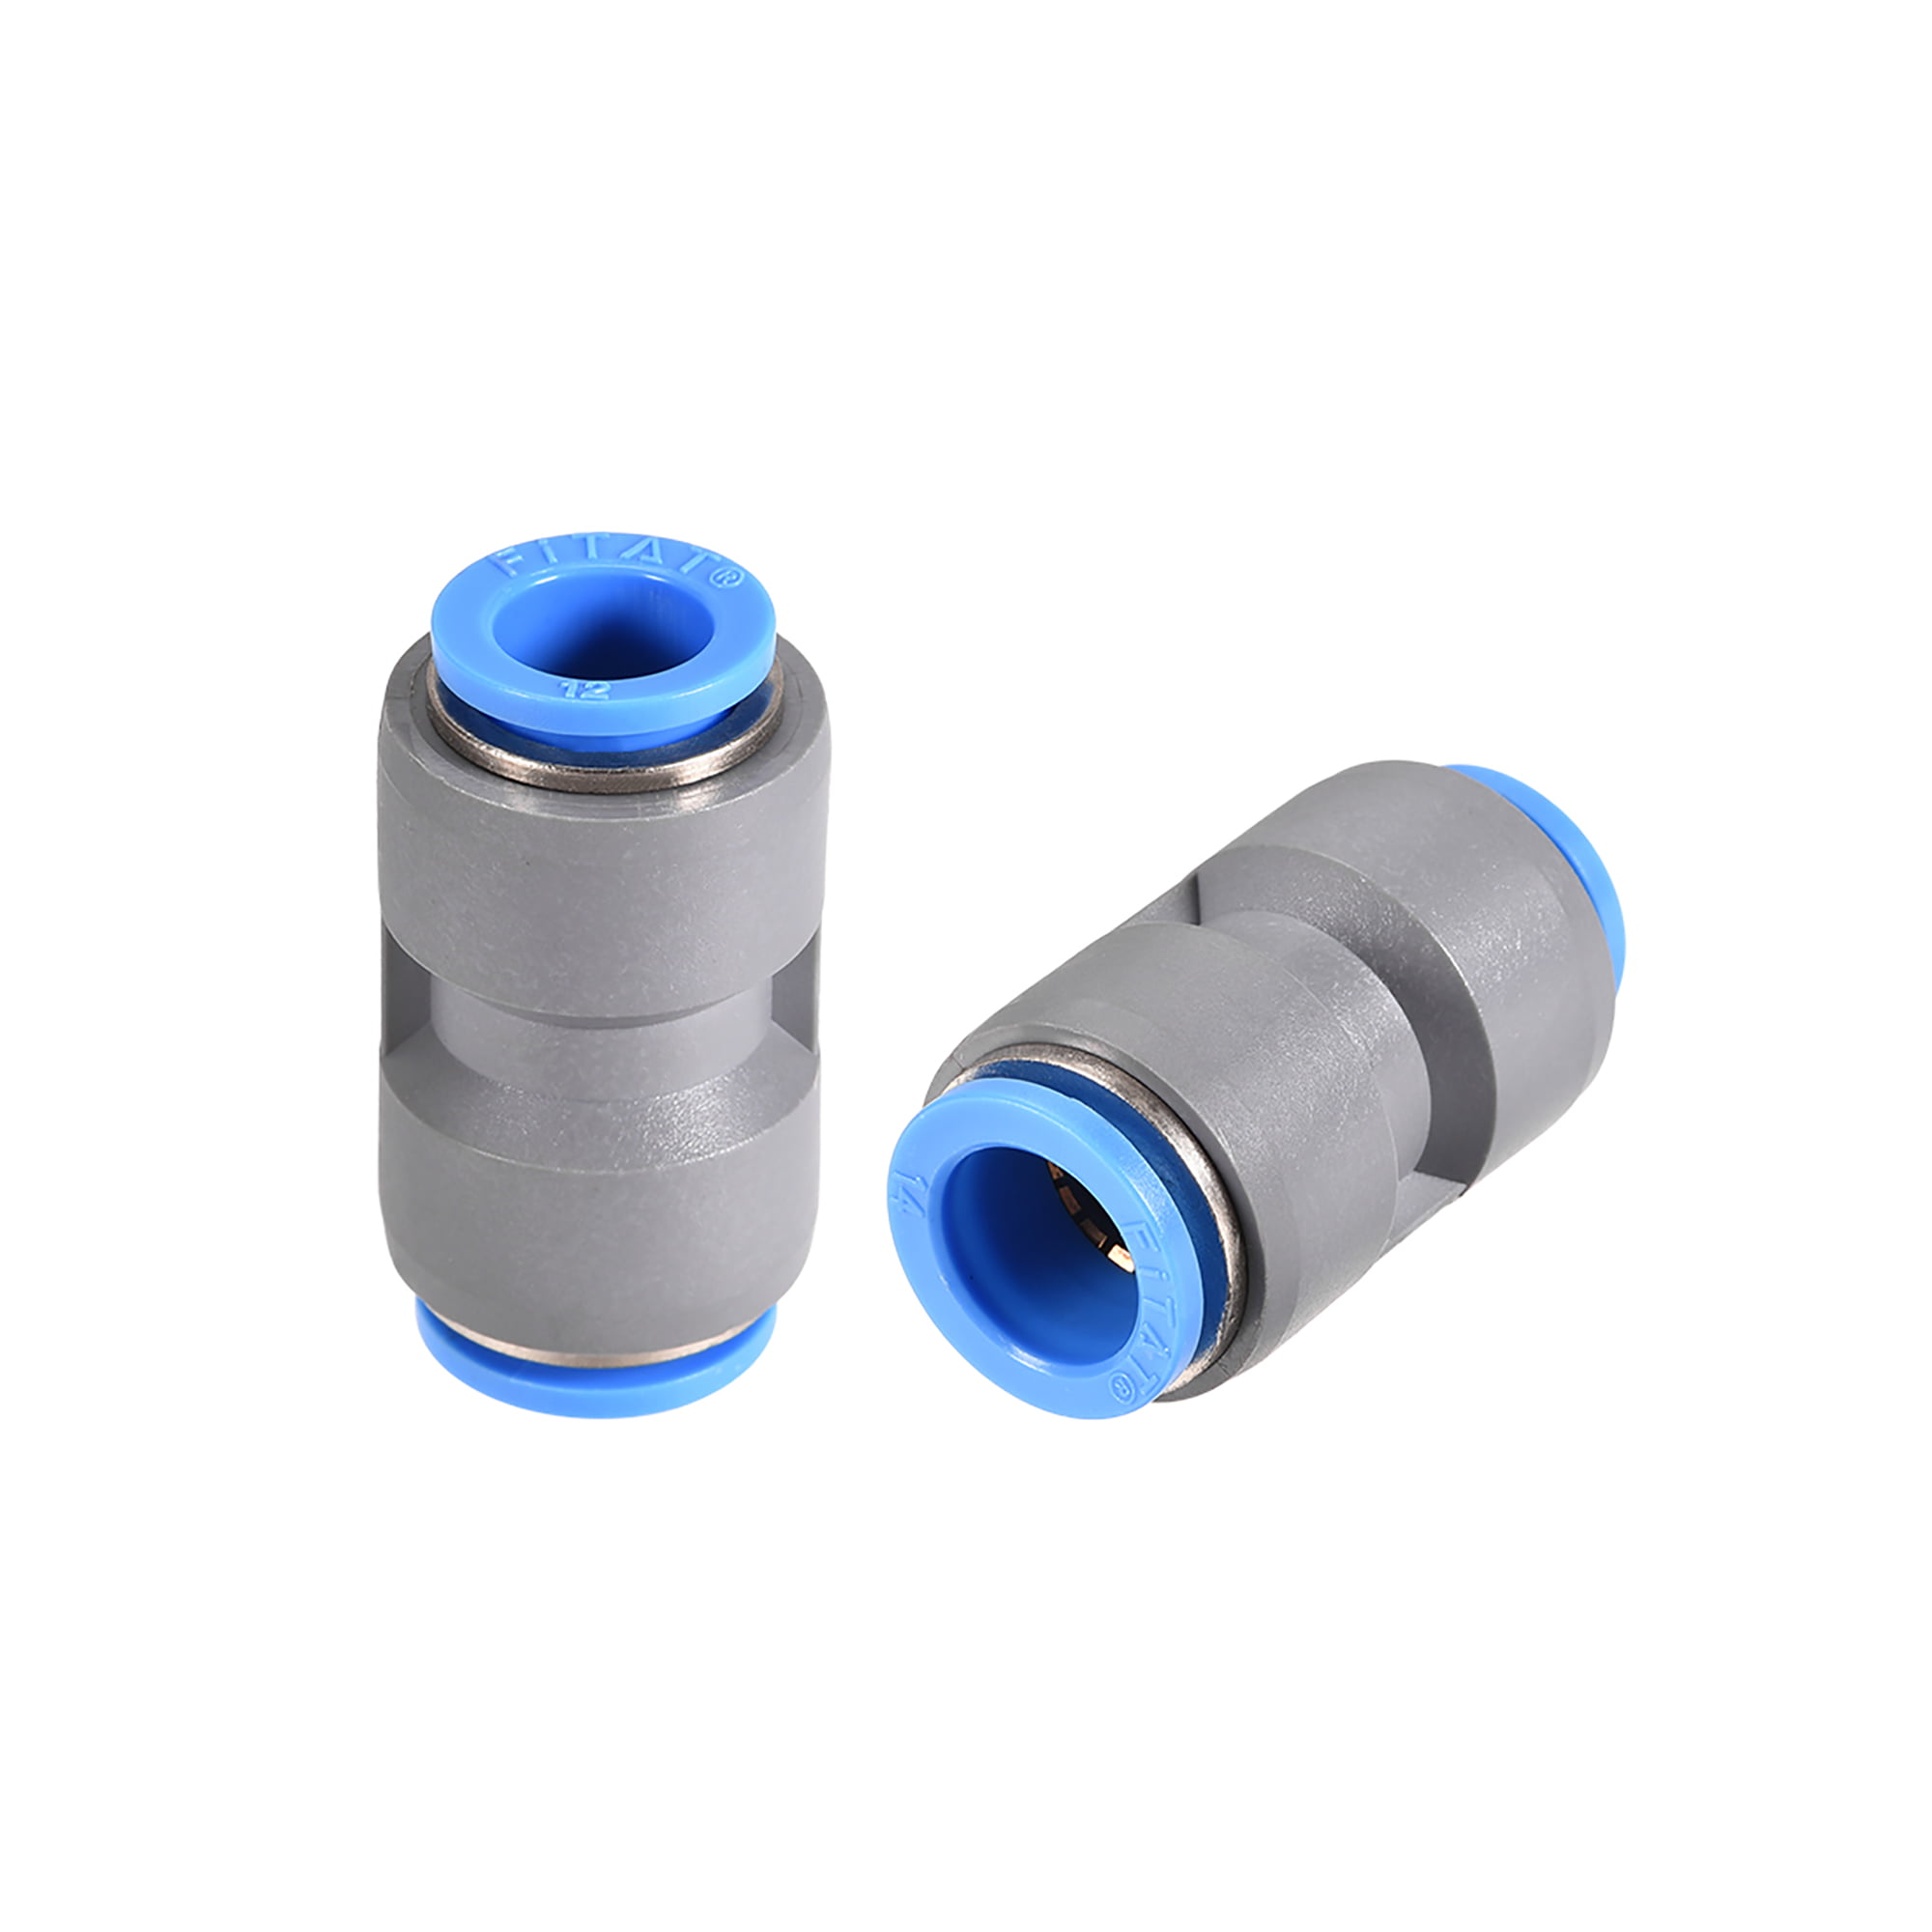 Straight Connectors Puch Connect Fittings Air Line Quick 40 Pcs Accessories for sale online 